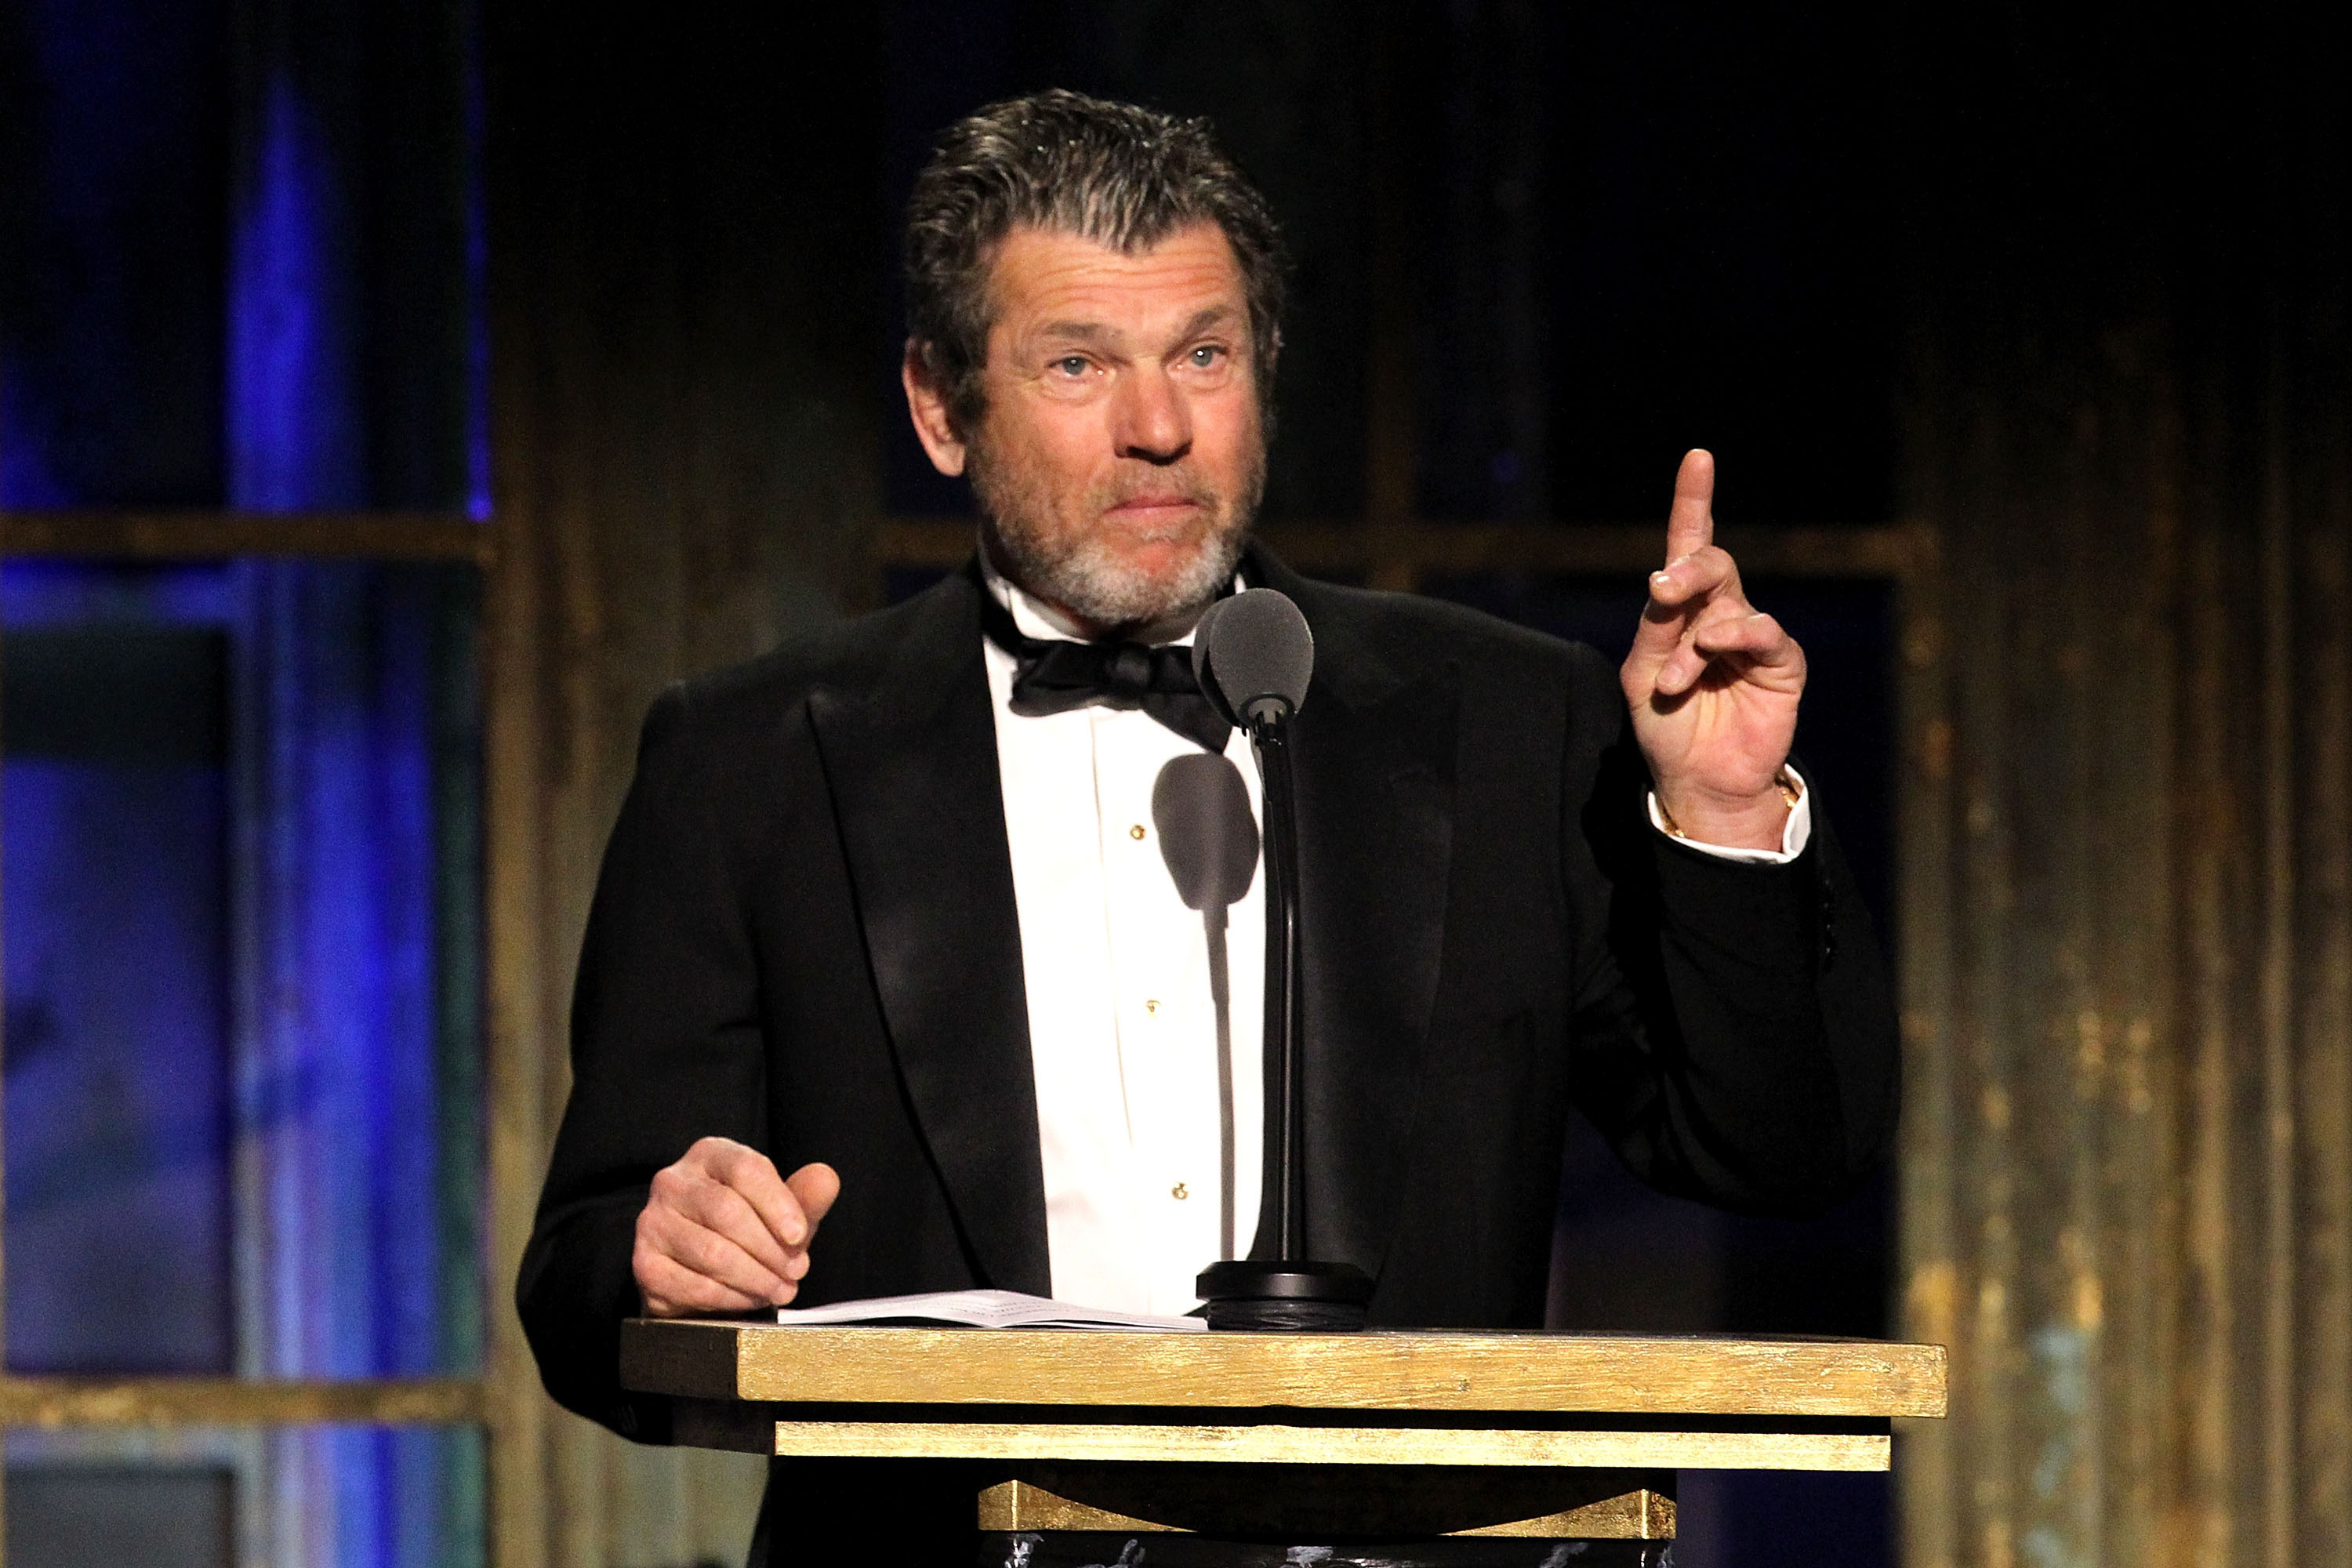 Jann S. Wenner at a Rock & Roll Hall of Fame induction ceremony